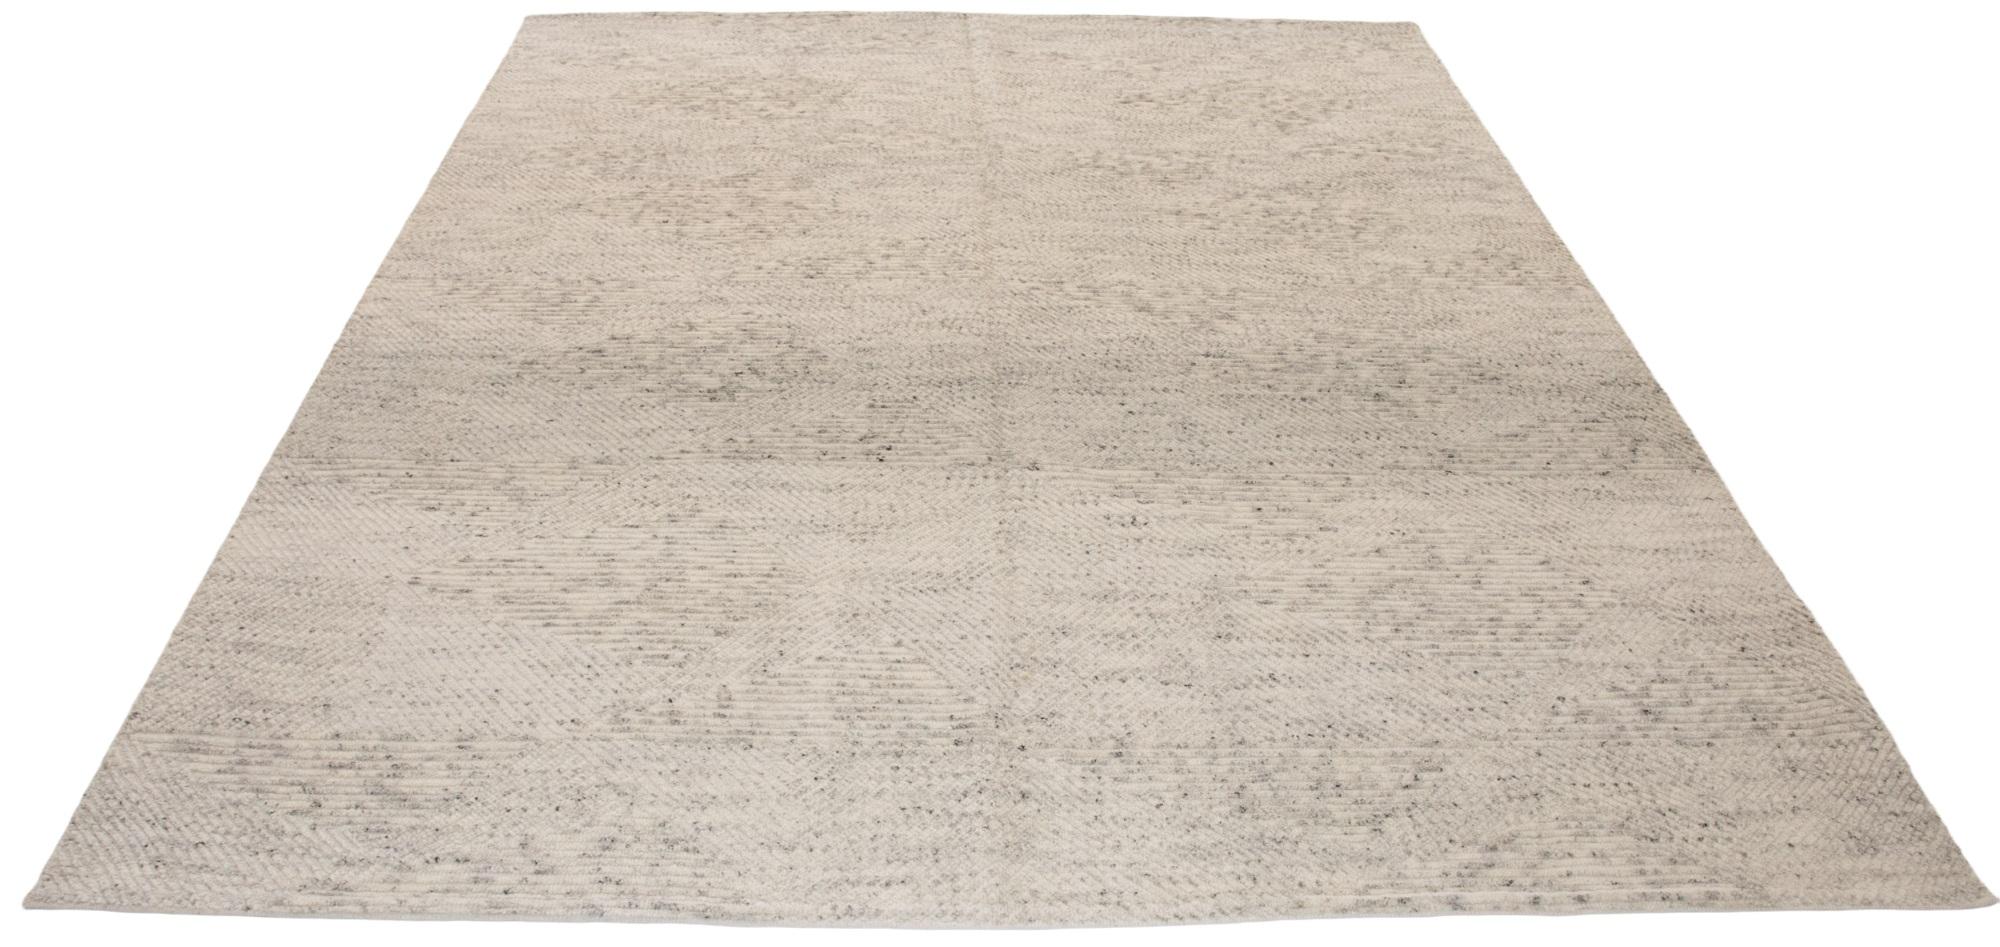 Indian Contemporary Minimalist Textured Hand-Knotted Cream Beige Wool Rug For Sale